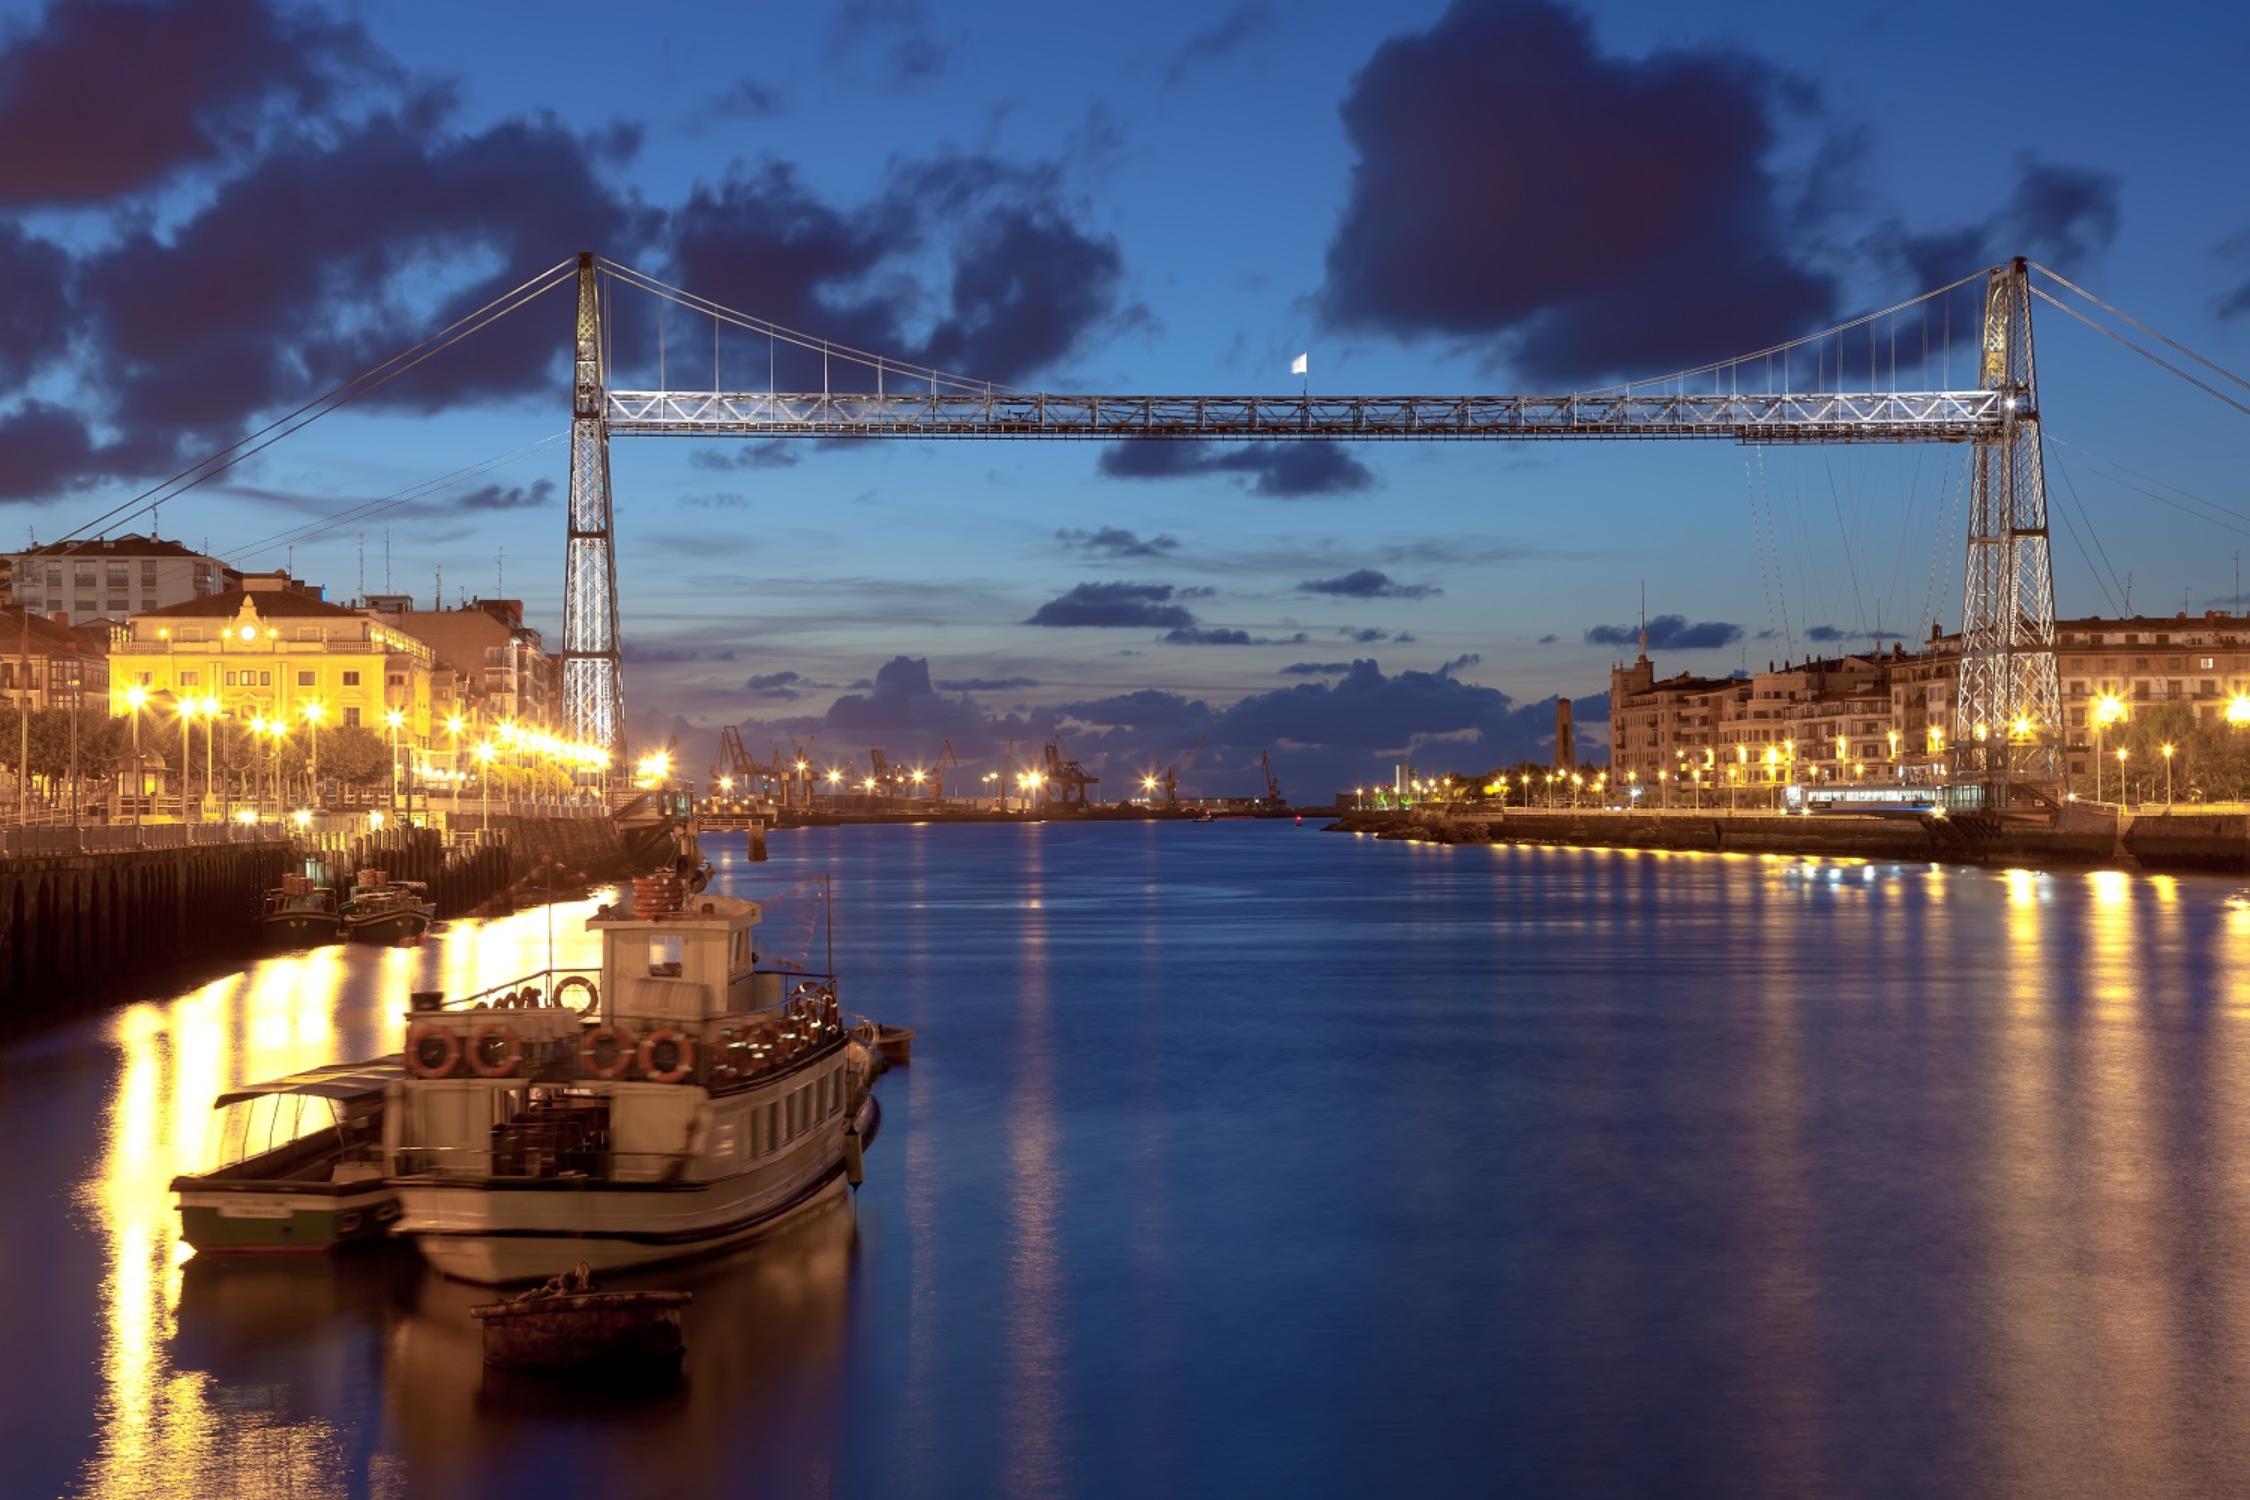 Night-Time Yacht Cruise along the River in Bilbao – 4 hours departing from the port of Getxo